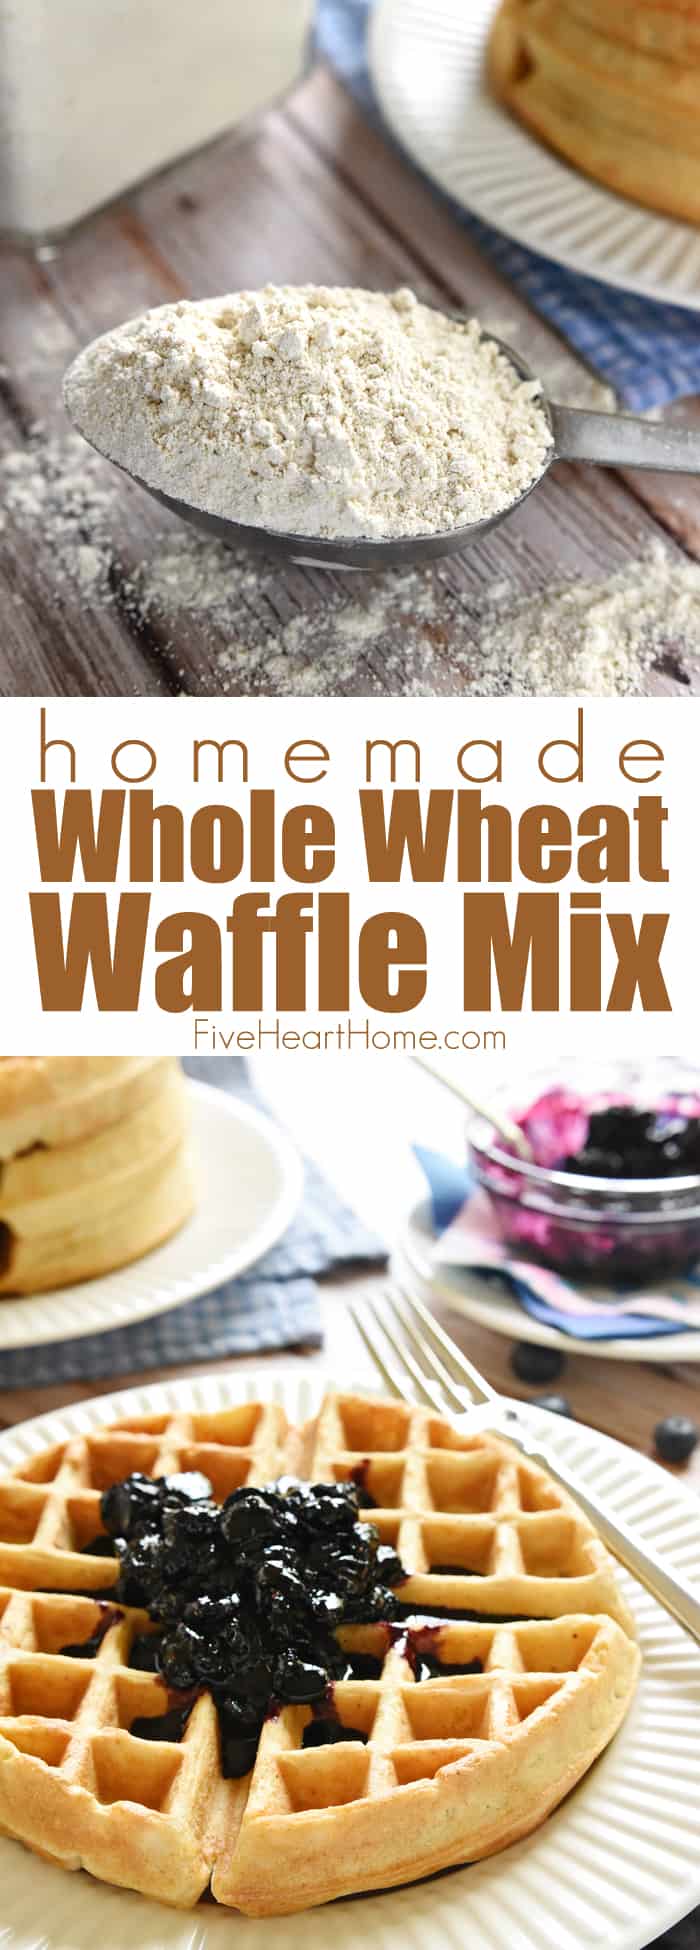 Homemade Whole Wheat Waffle Mix ~ an economical pantry staple for conveniently whipping up fluffy, all-natural, 100% whole wheat waffles! | FiveHeartHome.com via @fivehearthome